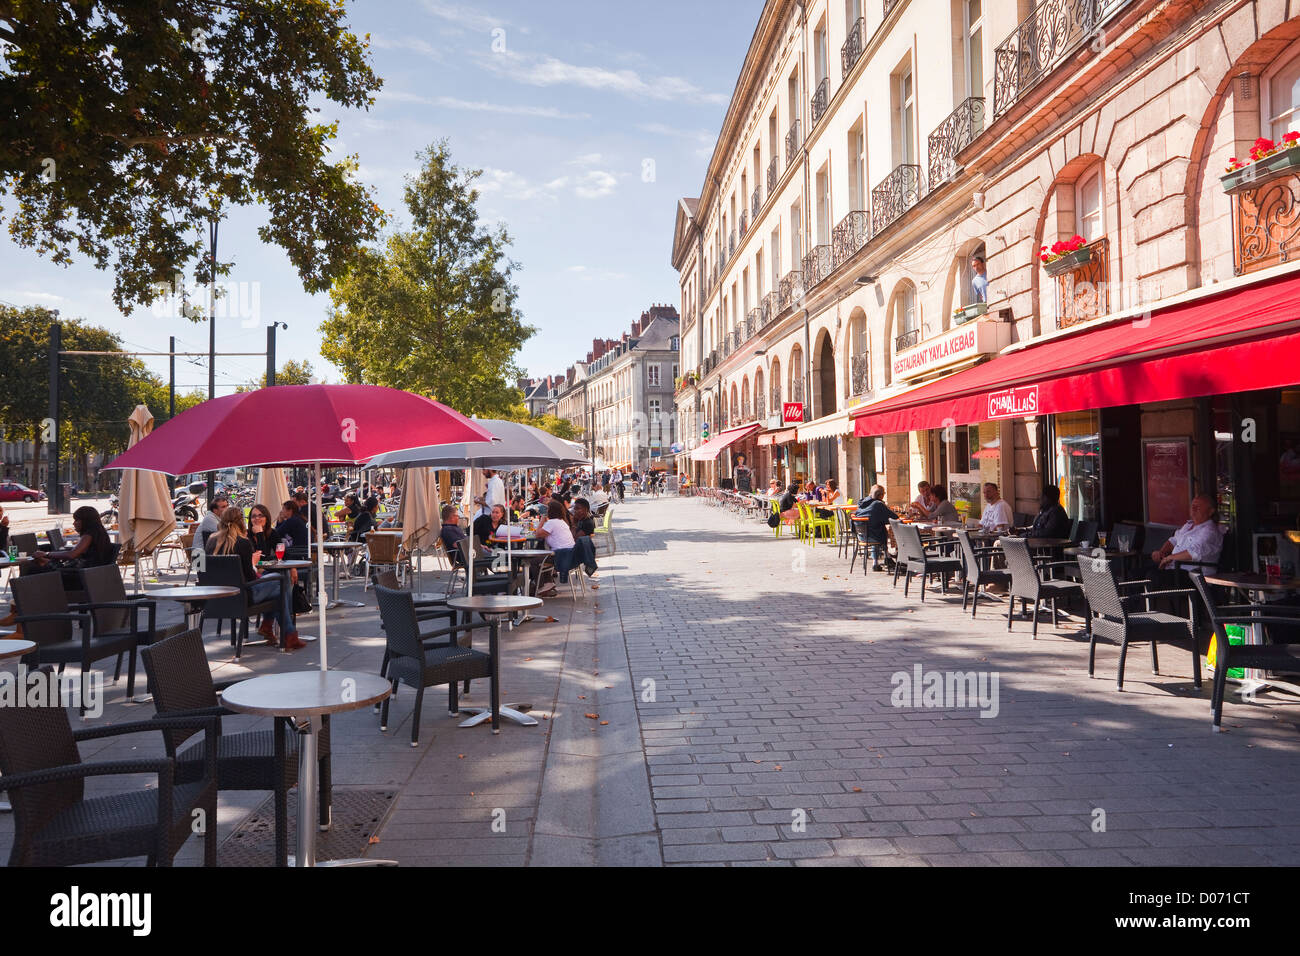 People eating outdoors at a restaurant in Nantes, France. Stock Photo